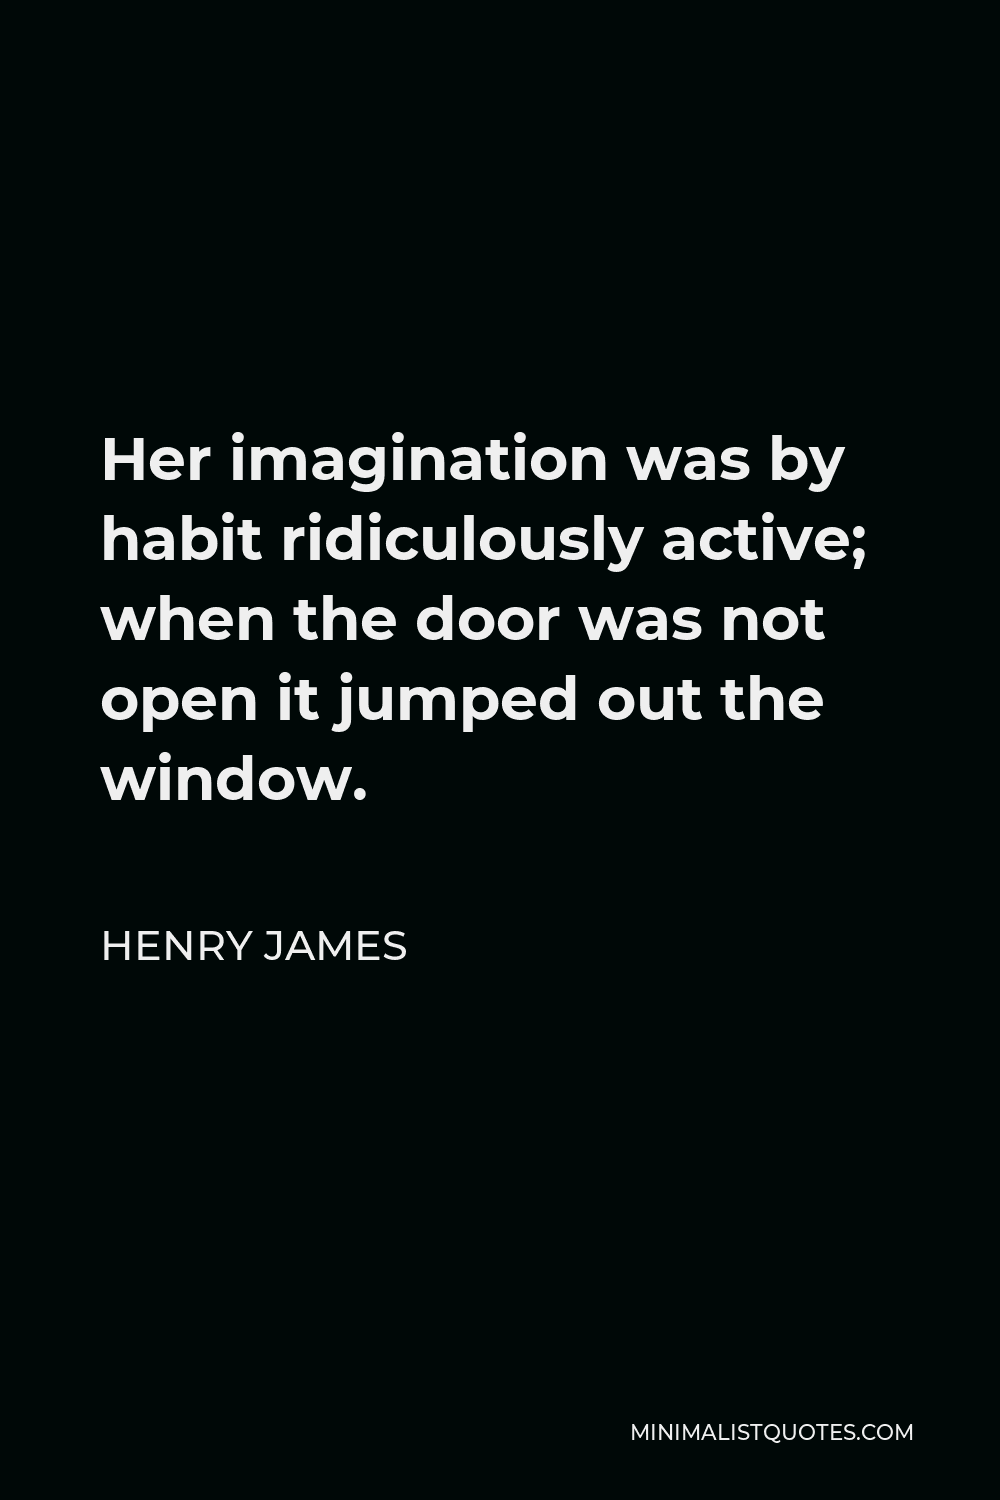 Henry James Quote - Her imagination was by habit ridiculously active; when the door was not open it jumped out the window.